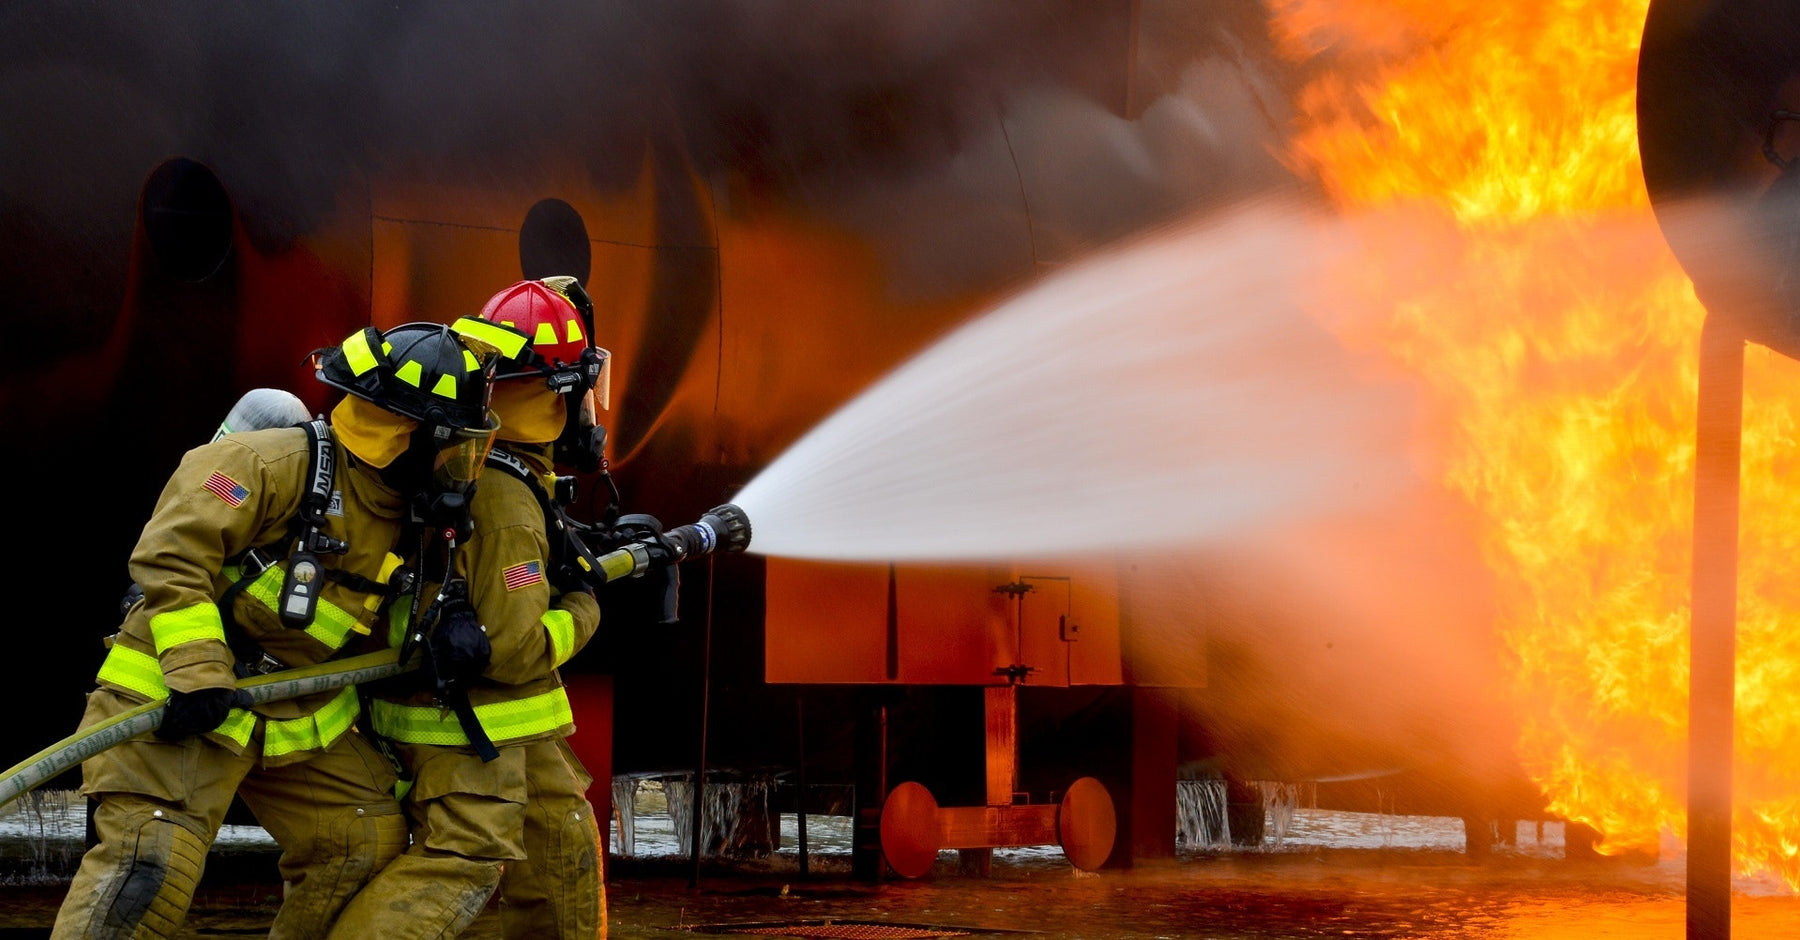 What Is Flame Resistant Clothing? and How Does It work?